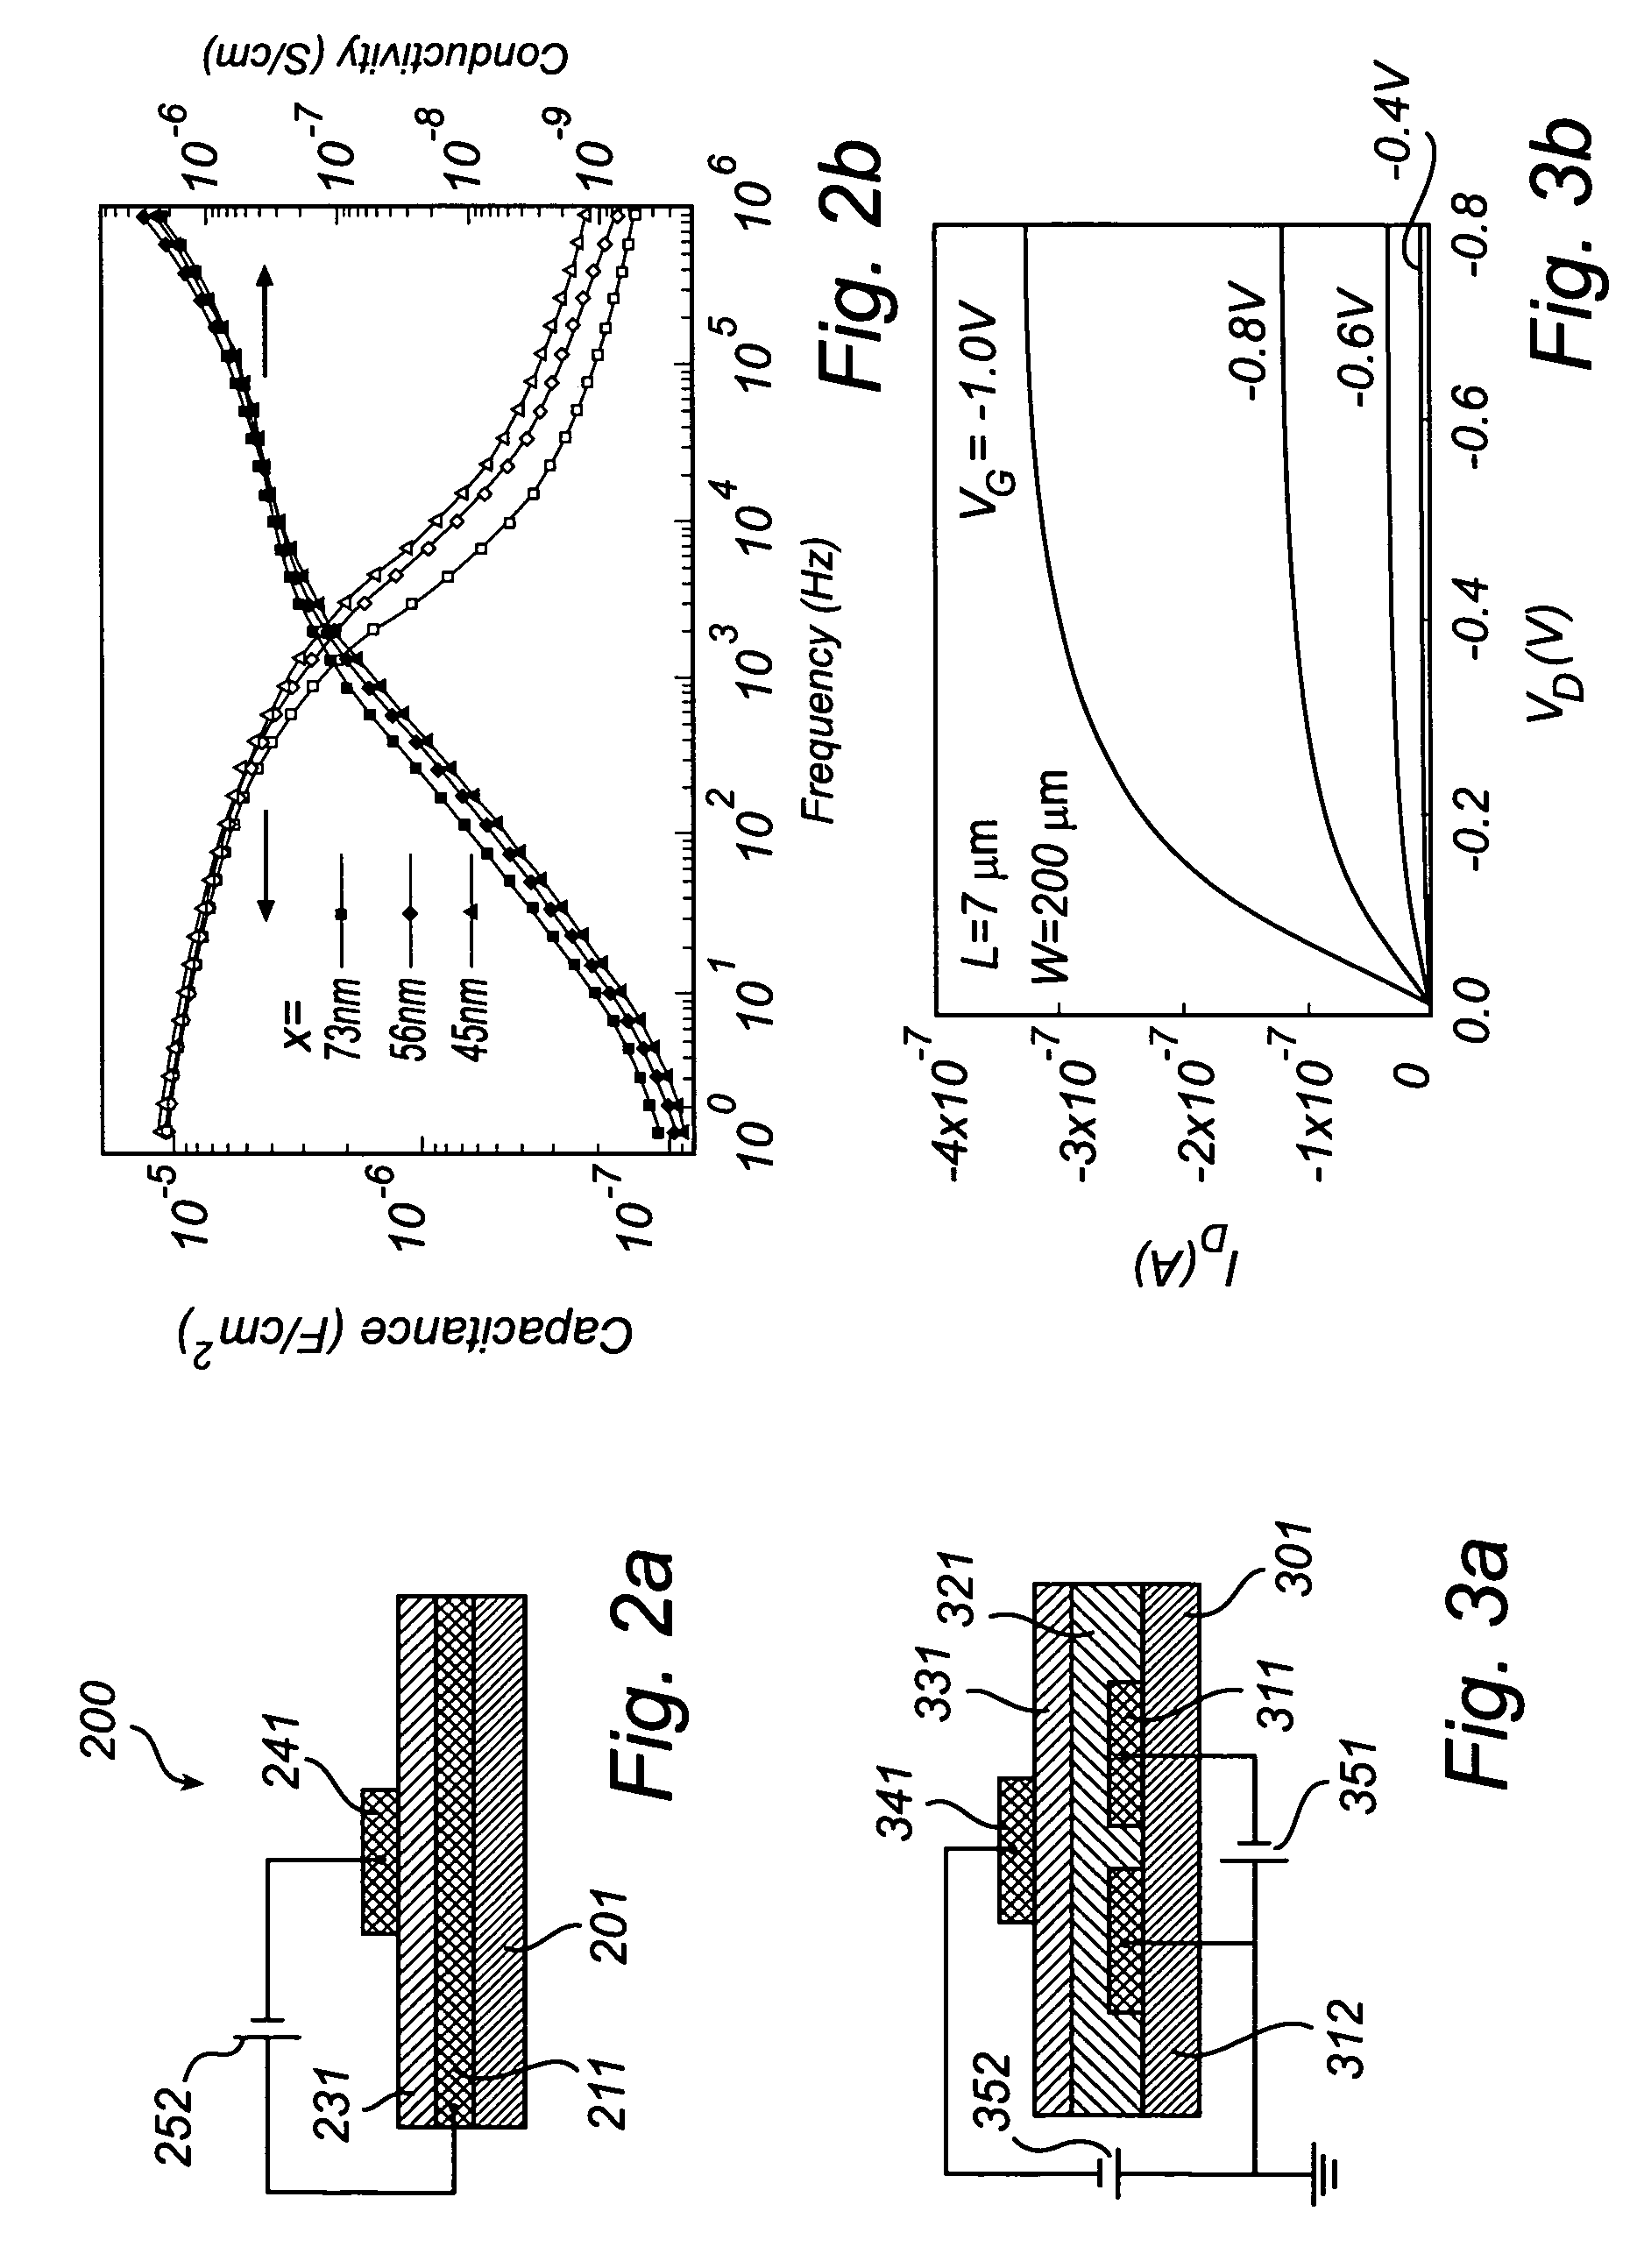 Transistor with large ion-complexes in electrolyte layer